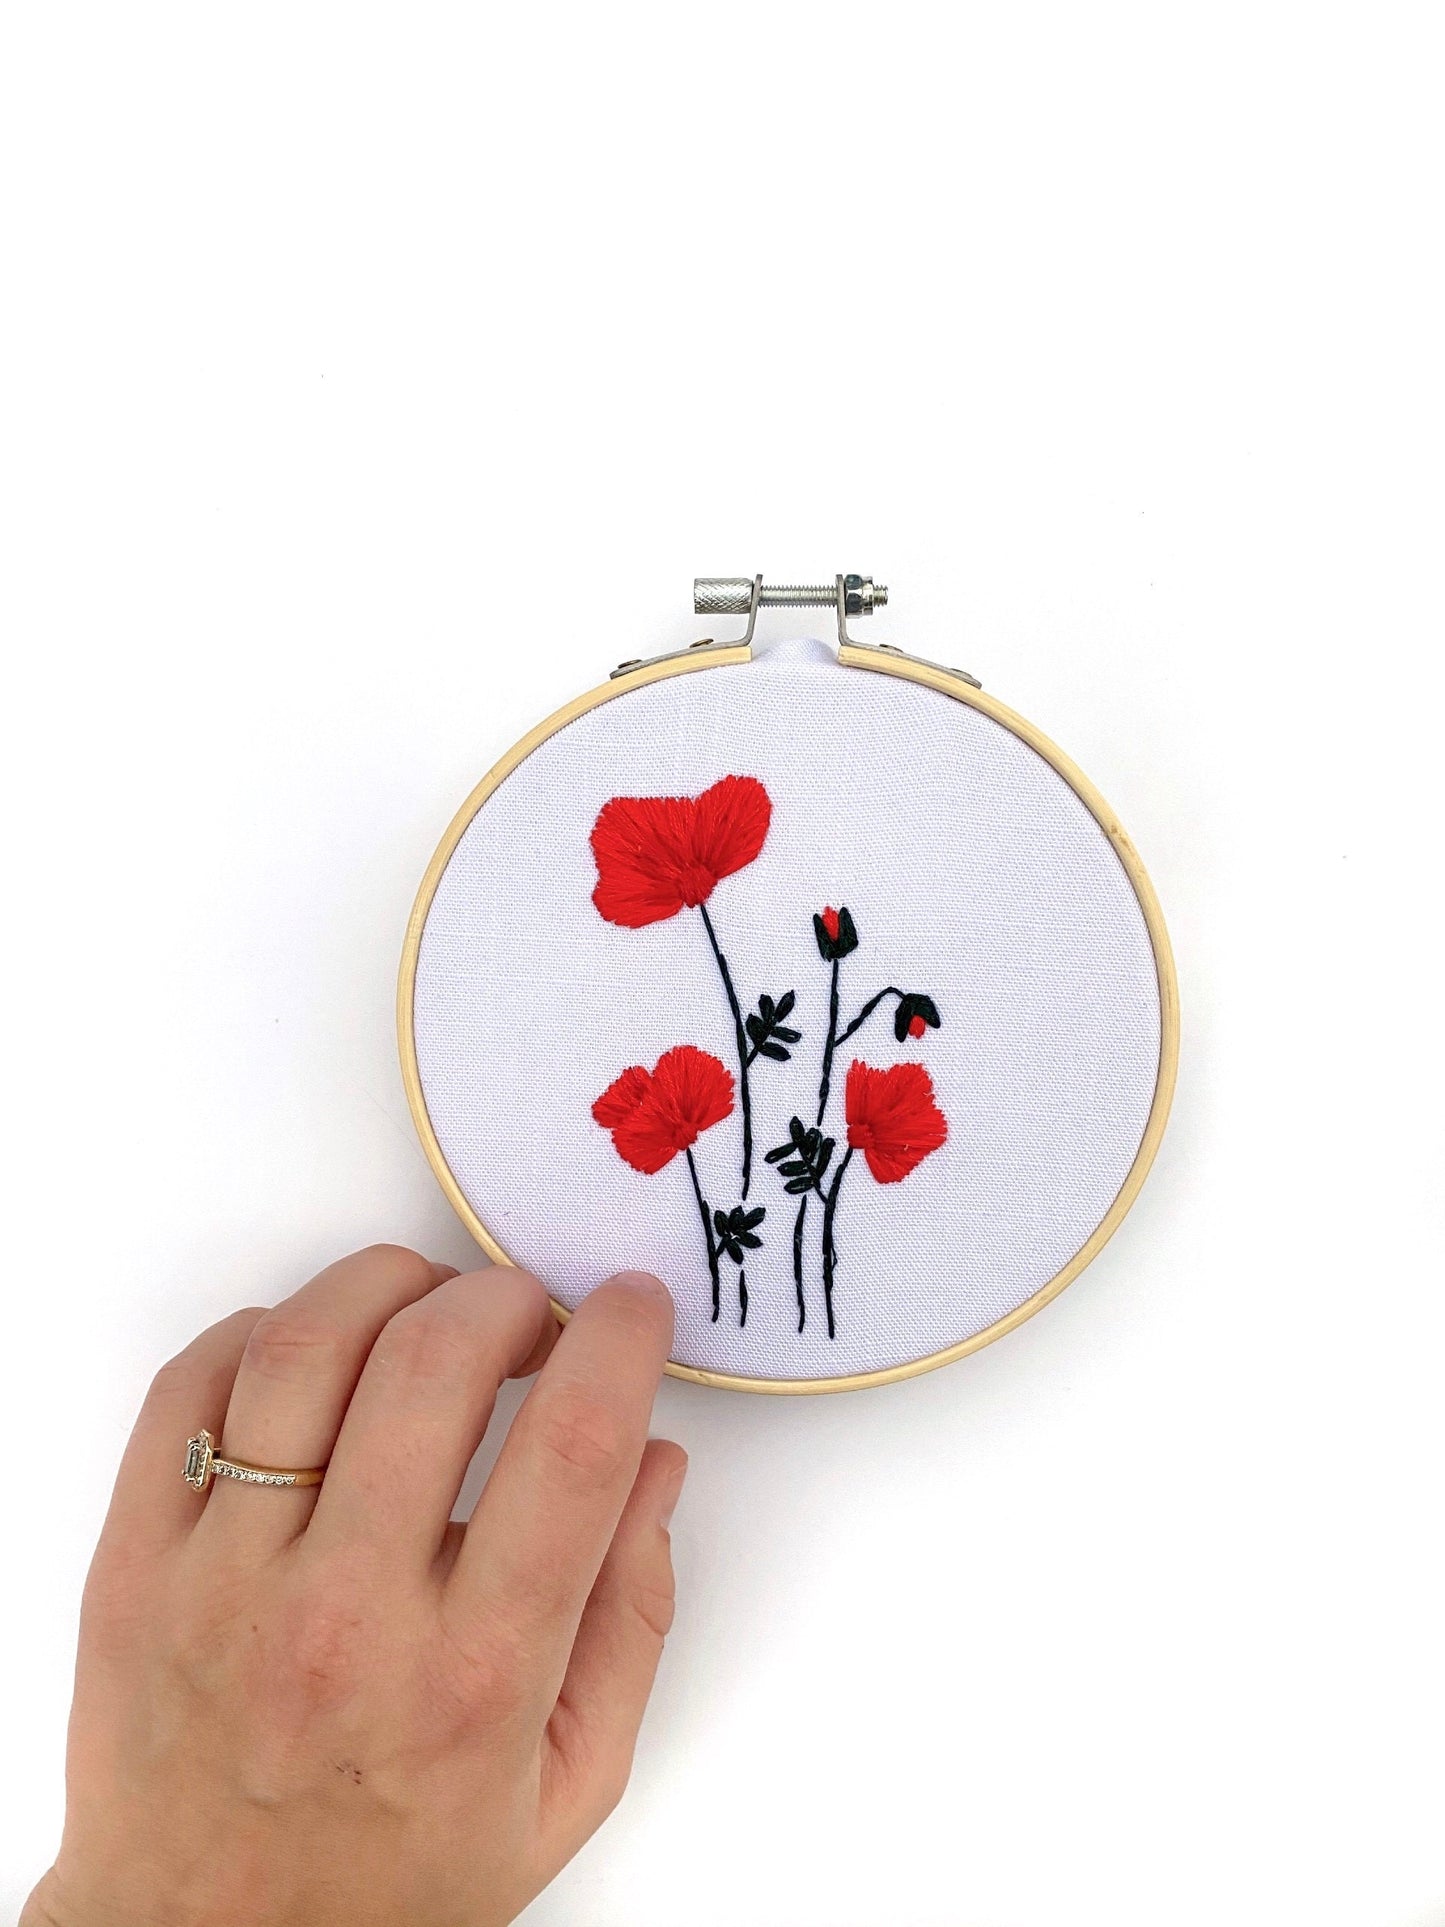 Forever Poppies PDF Embroidery Pattern